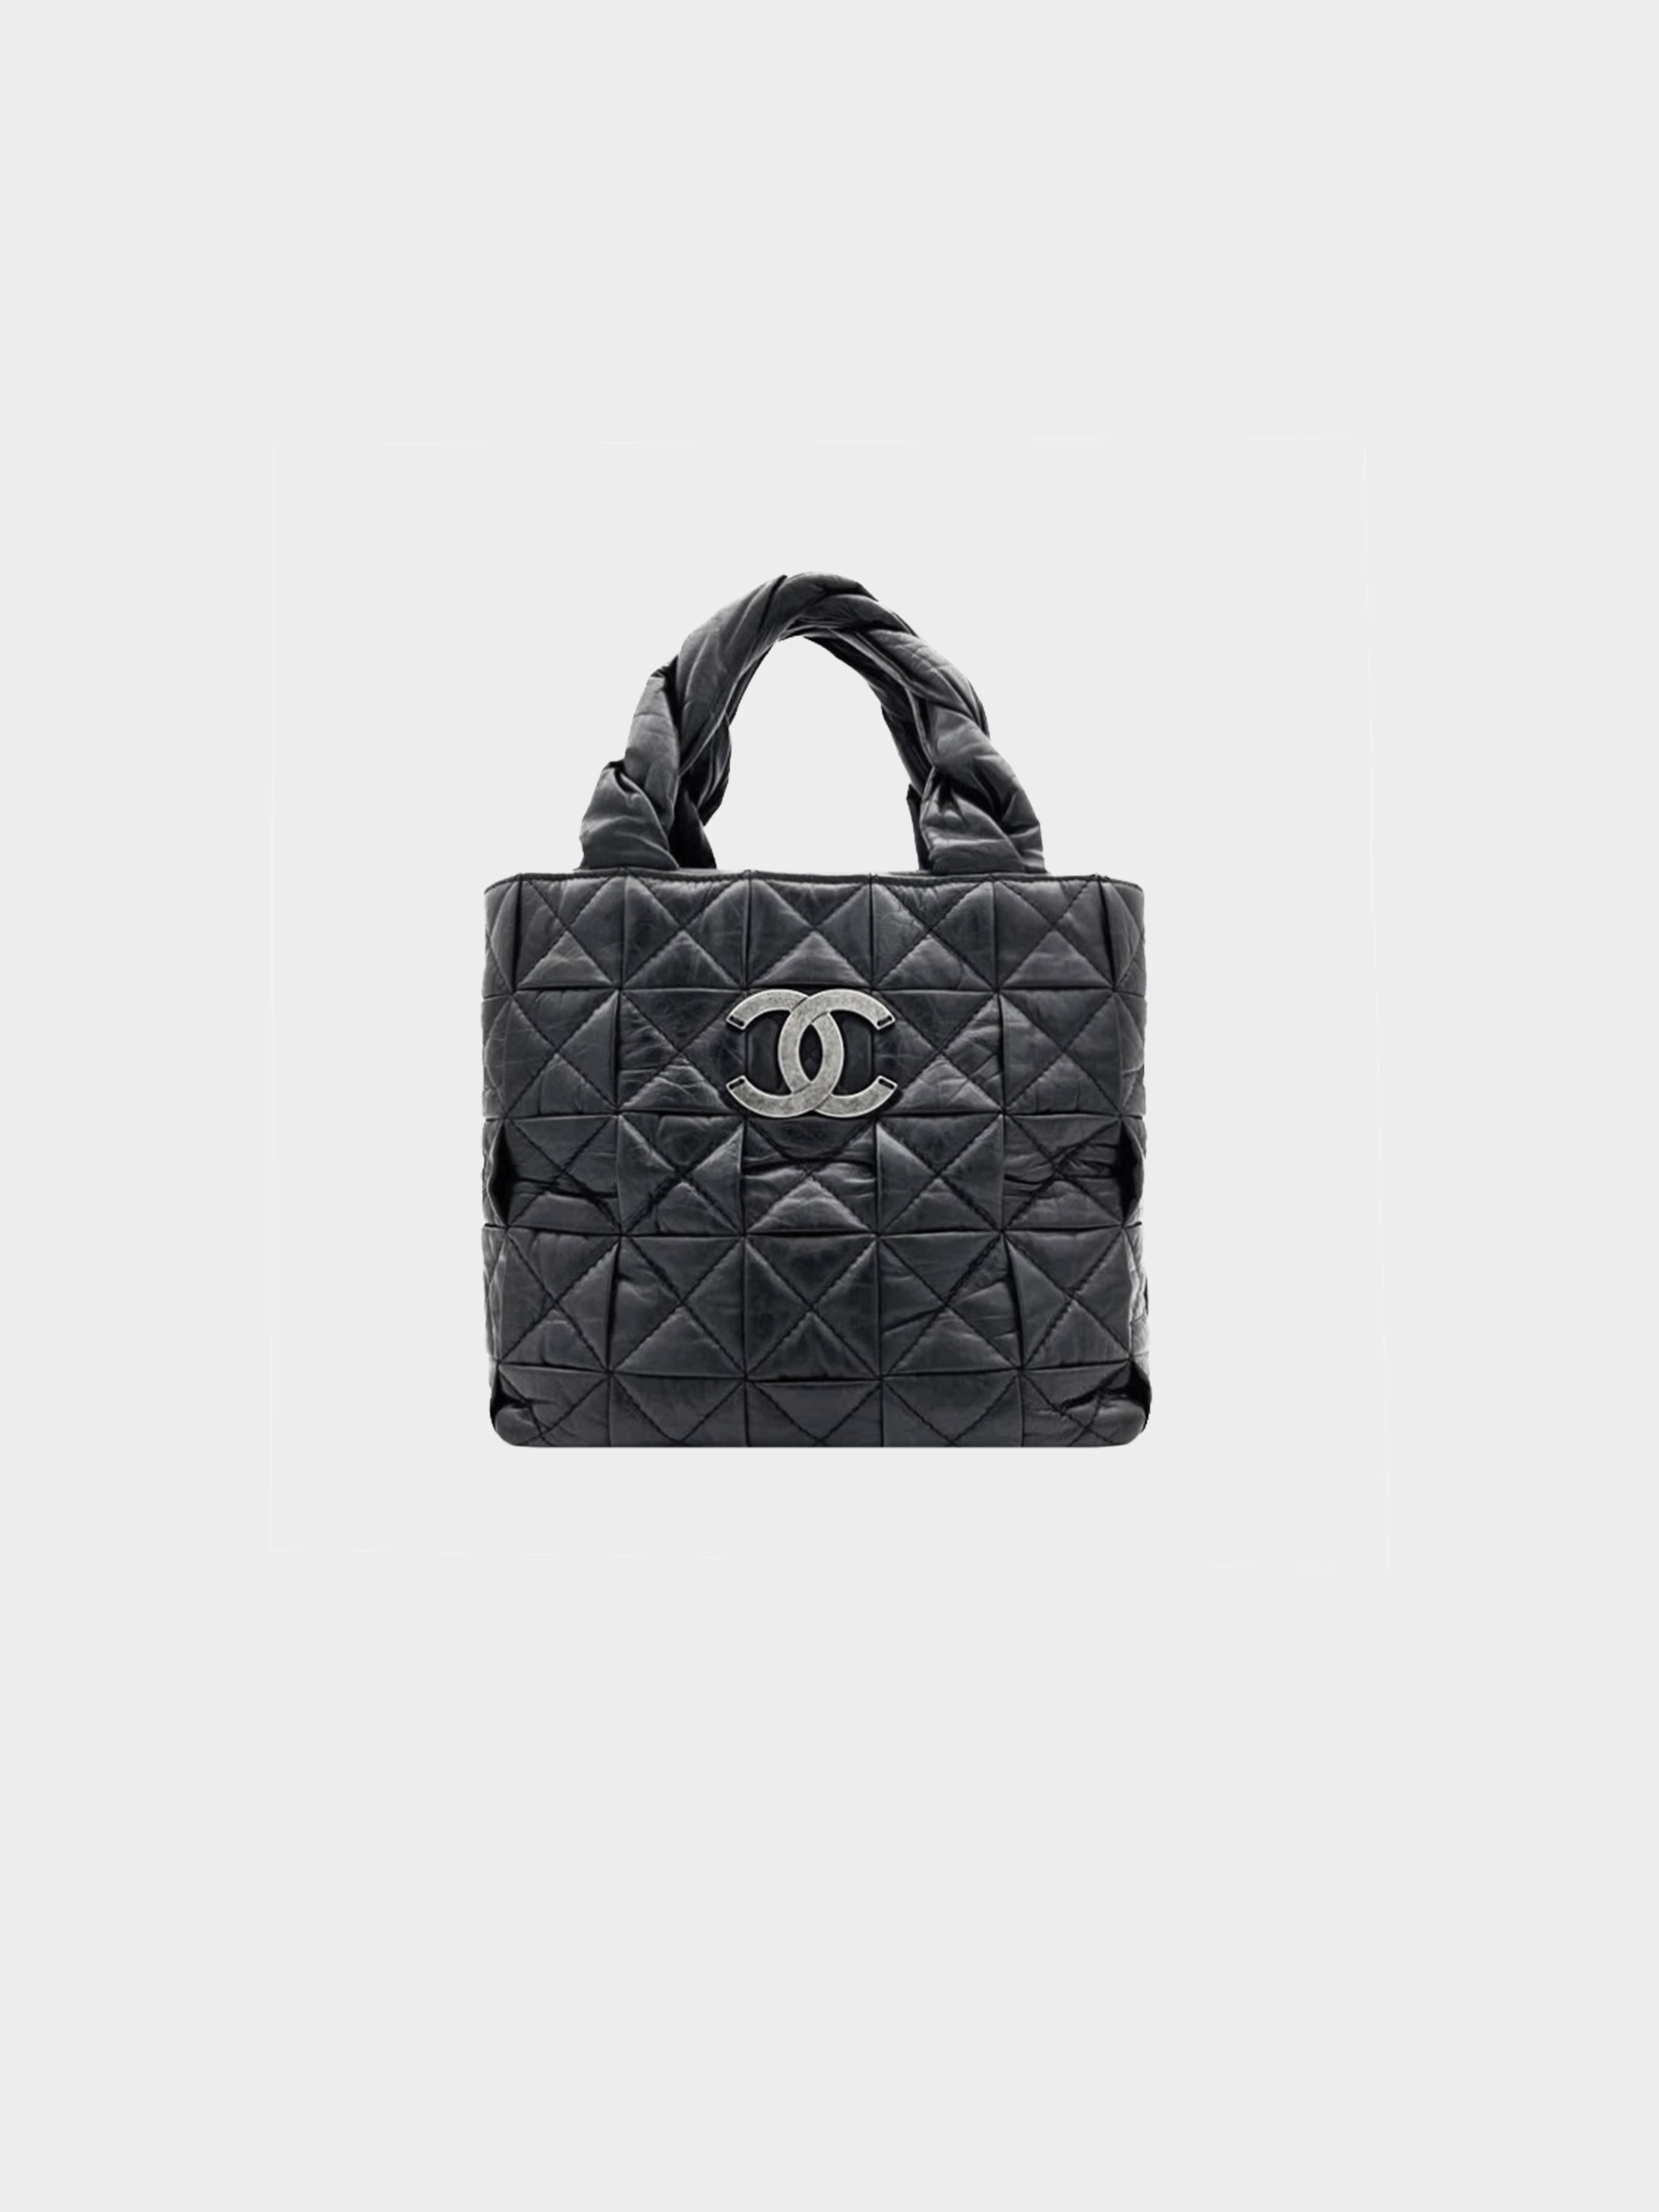 black chanel quilted purse